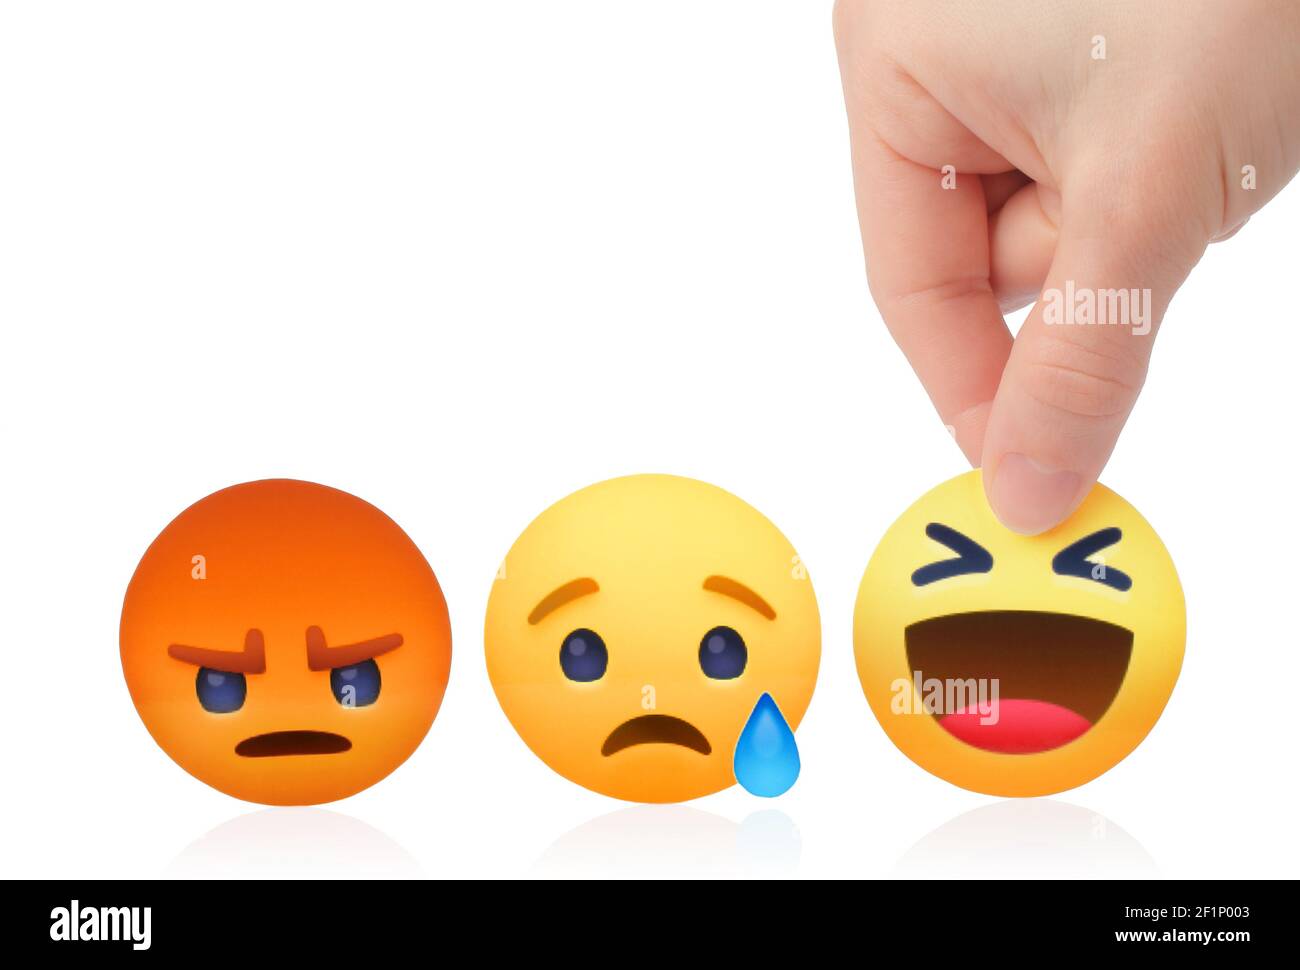 Kiev, Ukraine - February 18, 2021: Choosing concept with woman hand and Facebook logo with like button Empathetic Emoji Reactions Stock Photo